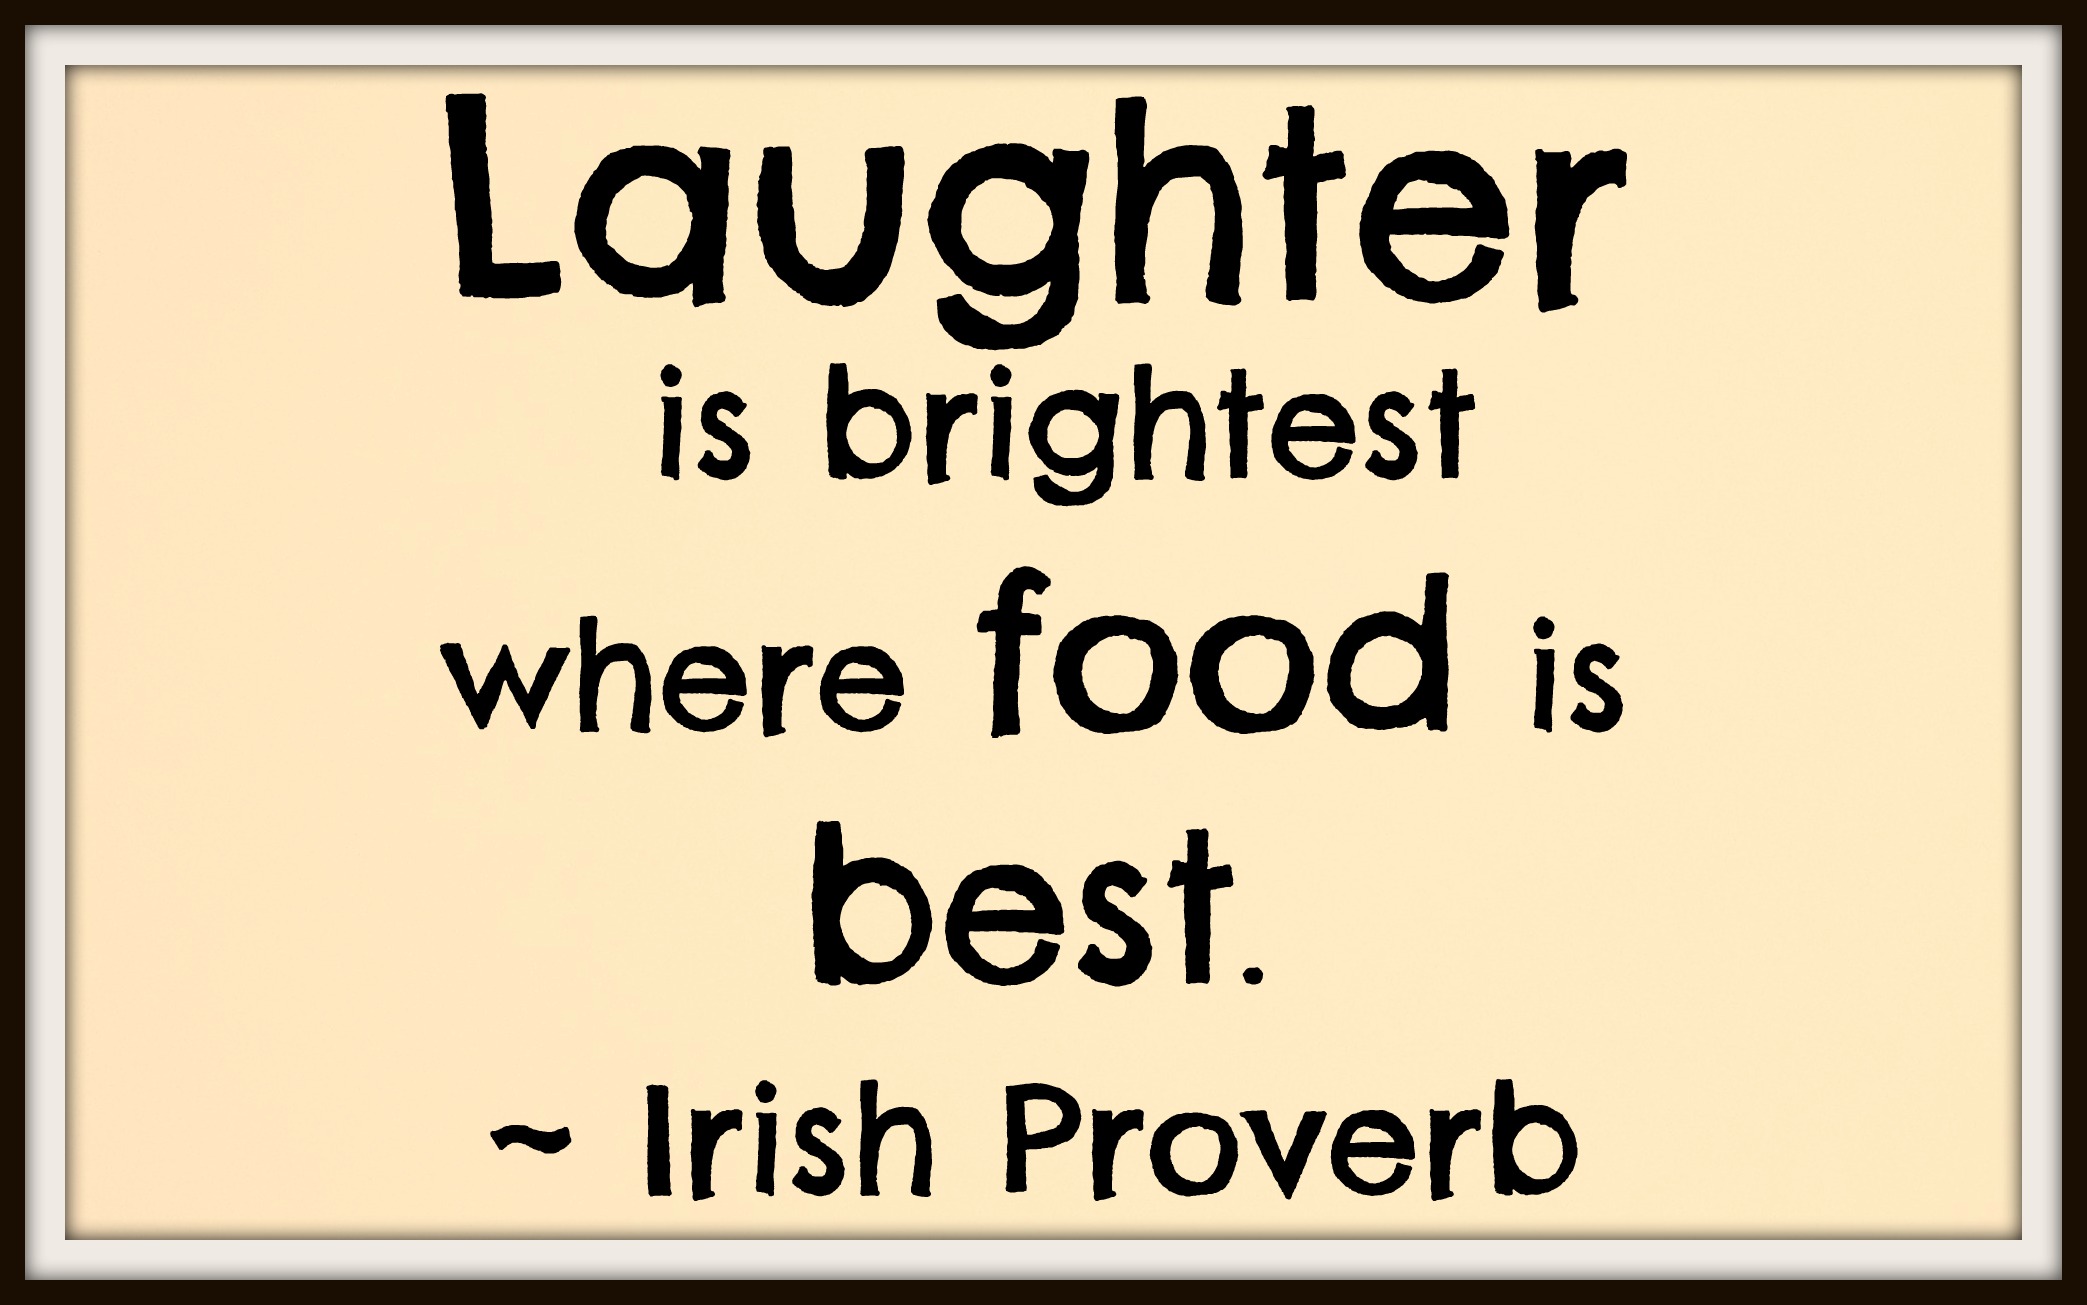 Laughter is brightest where food is best. Irish Proverb